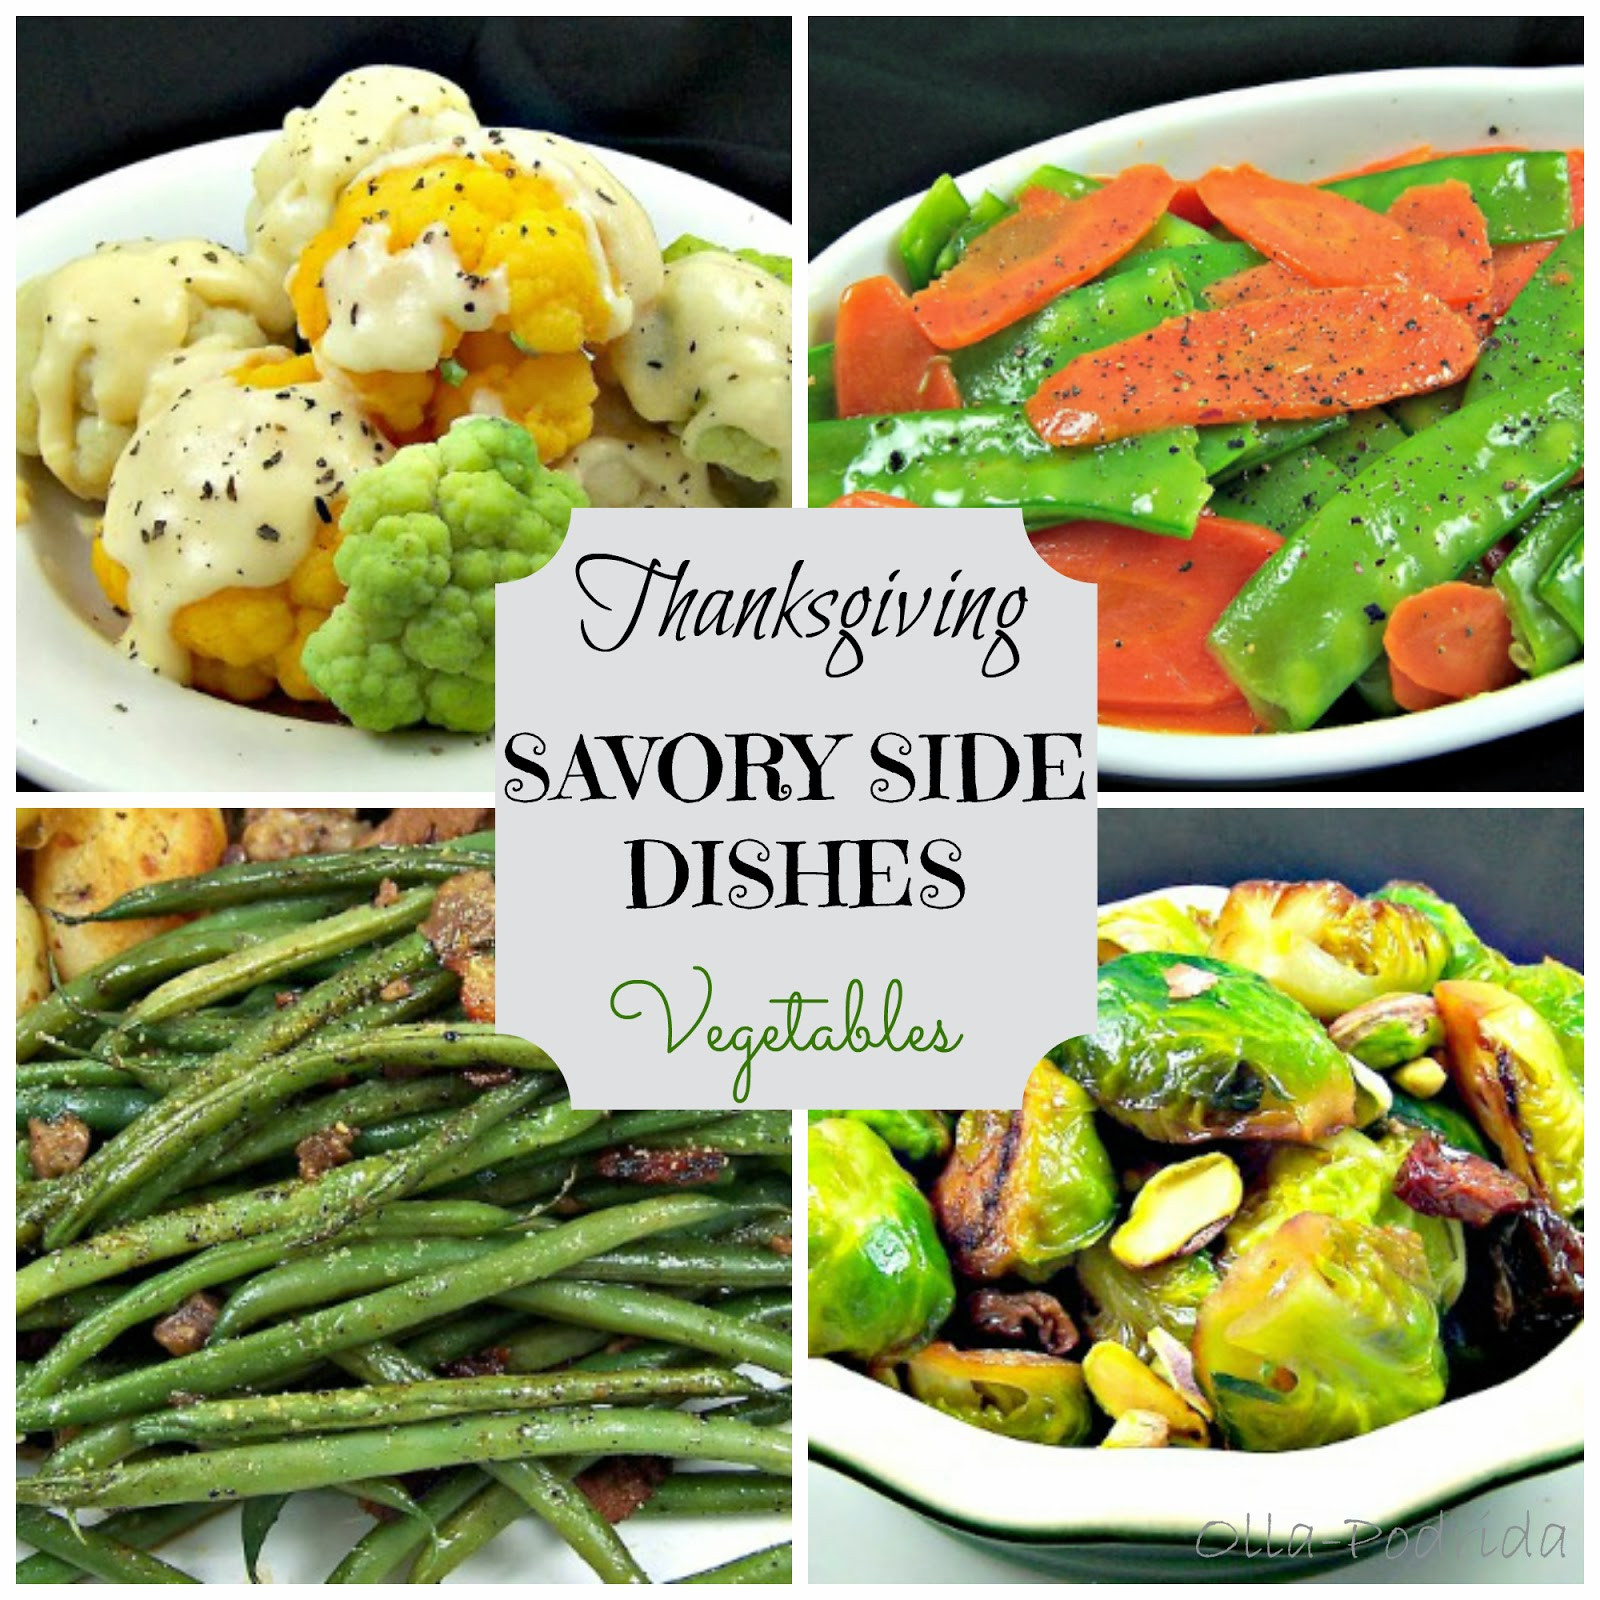 Vegetarian Side Dishes For Thanksgiving
 Olla Podrida Thanksgiving Savory Side Dishes Ve ables